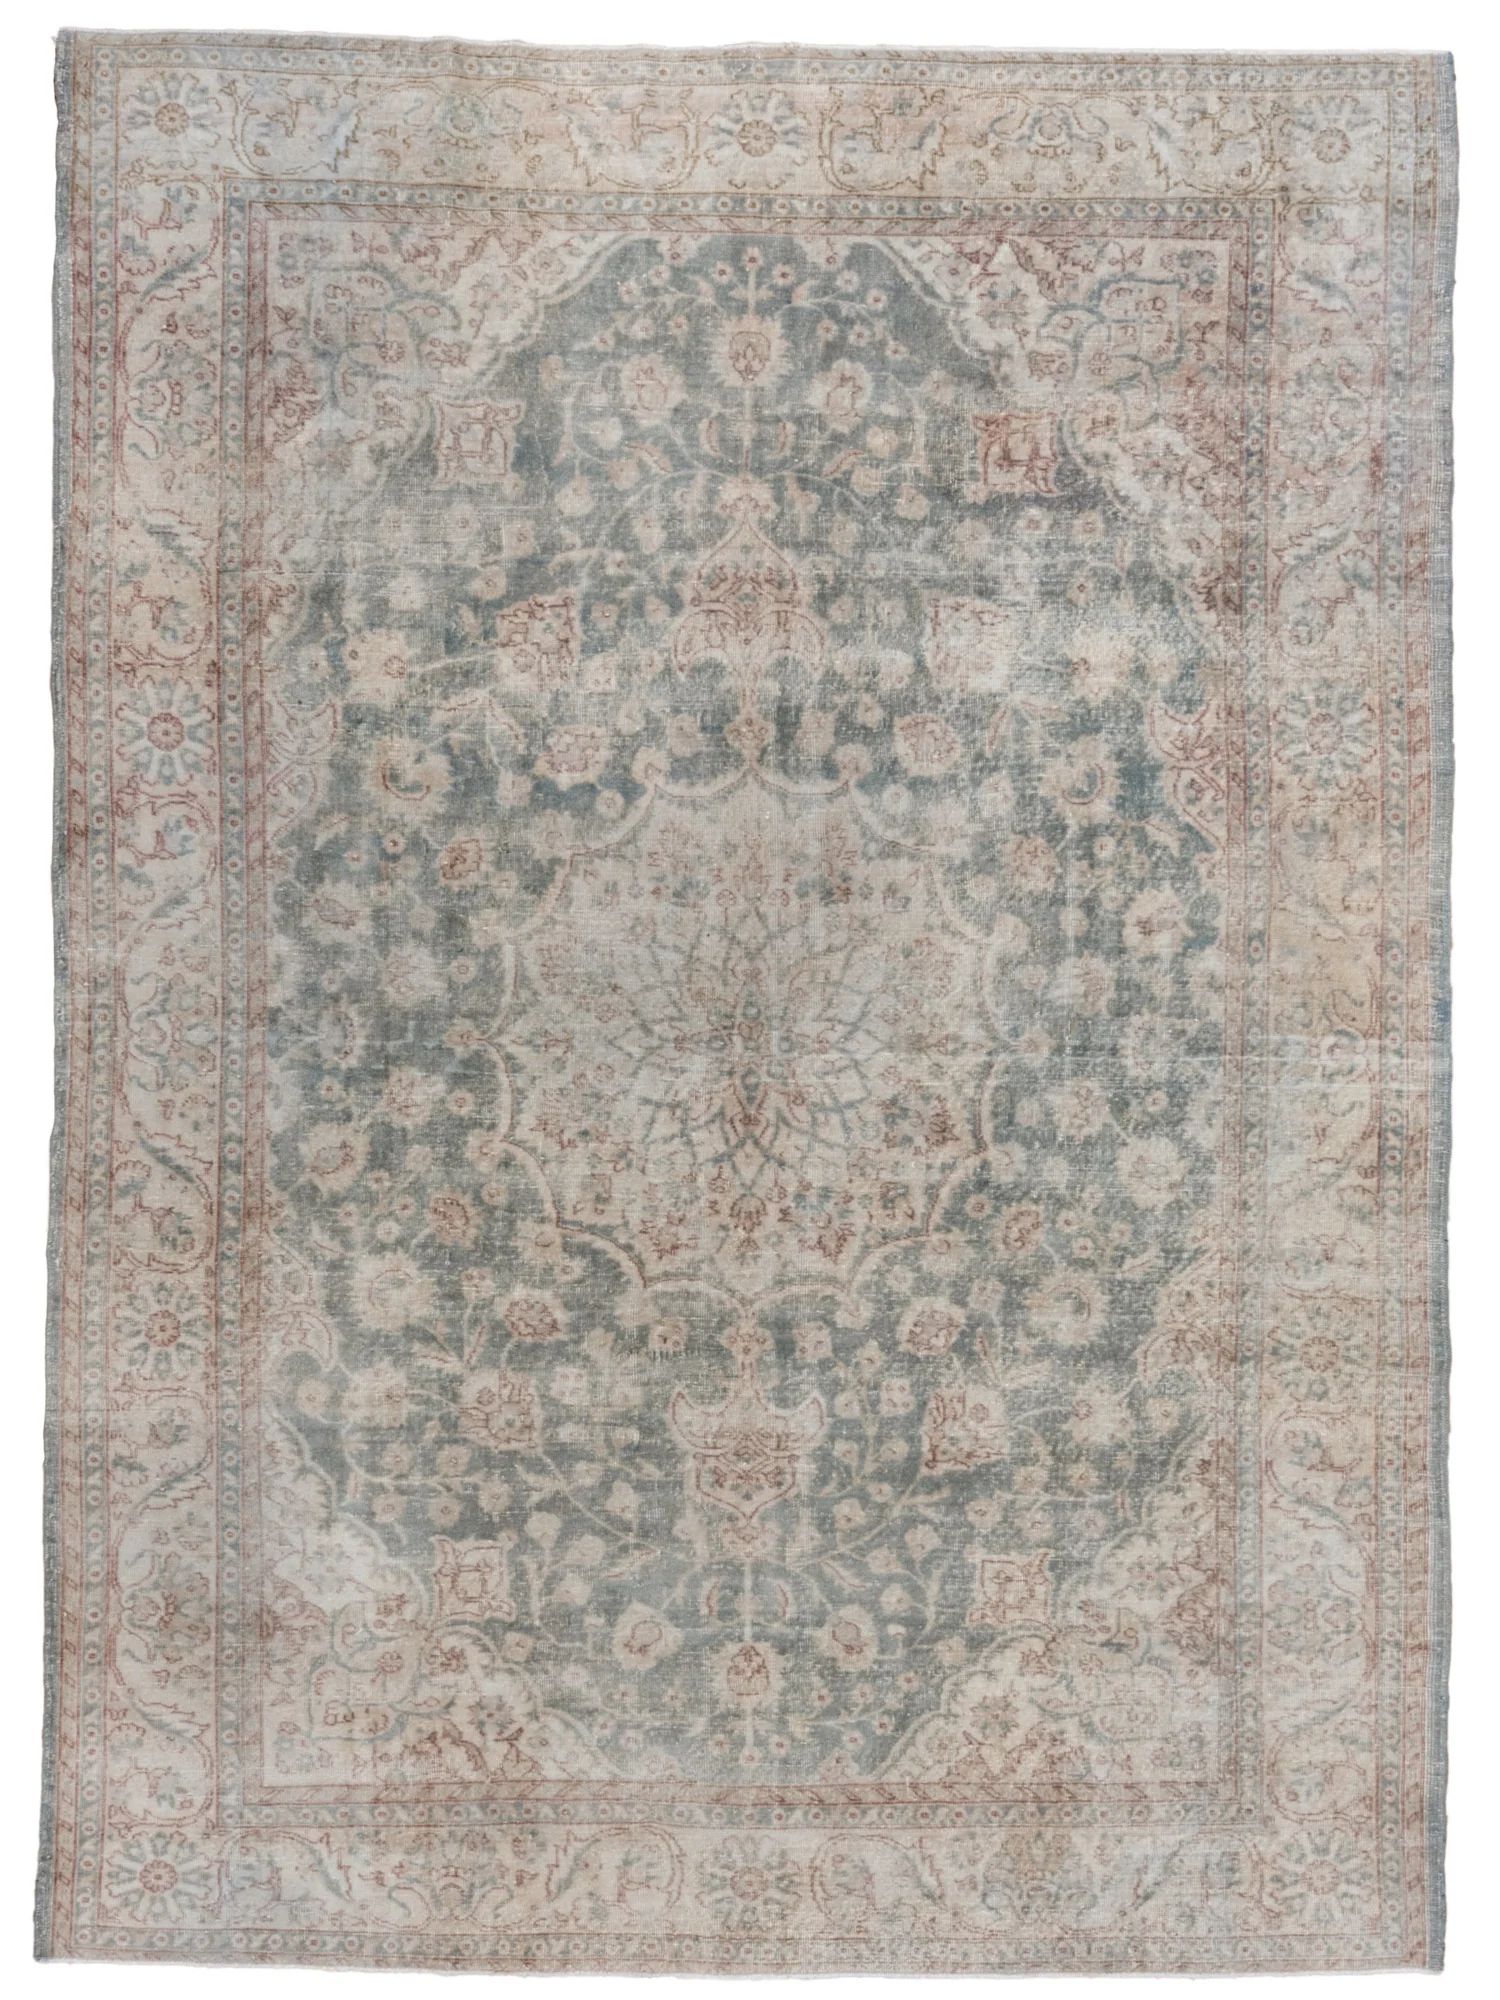 Beckwith (8 X 12) | The Vintage Rug Shop